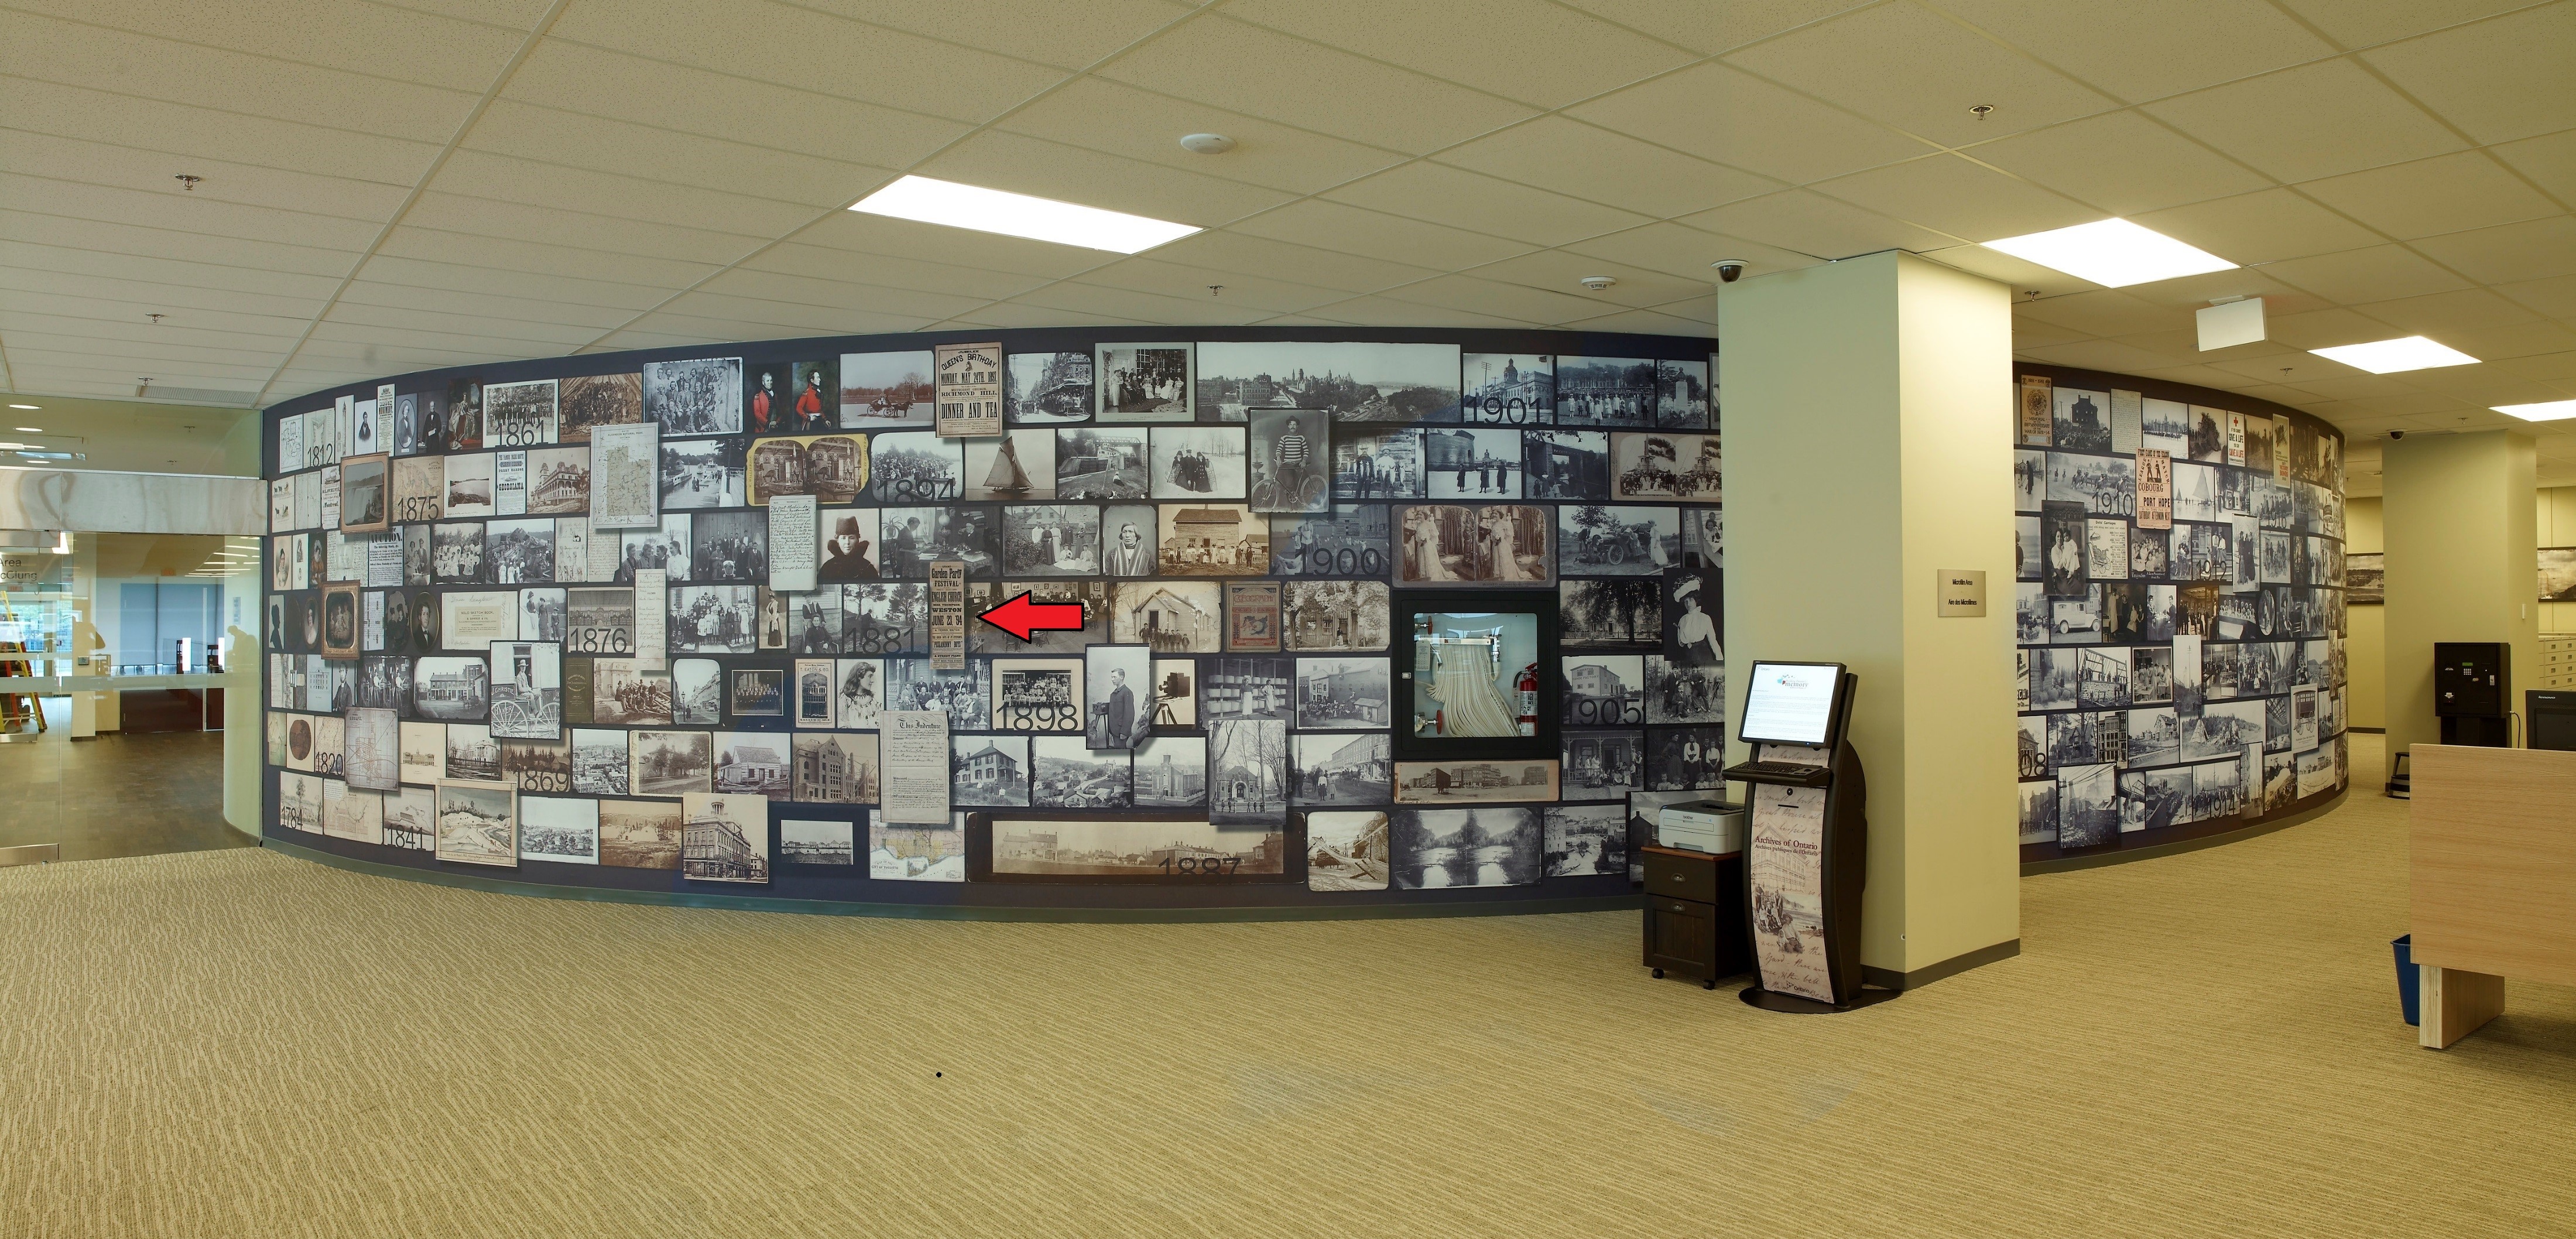 Panorama of the Archives of Ontario’s image montage wall